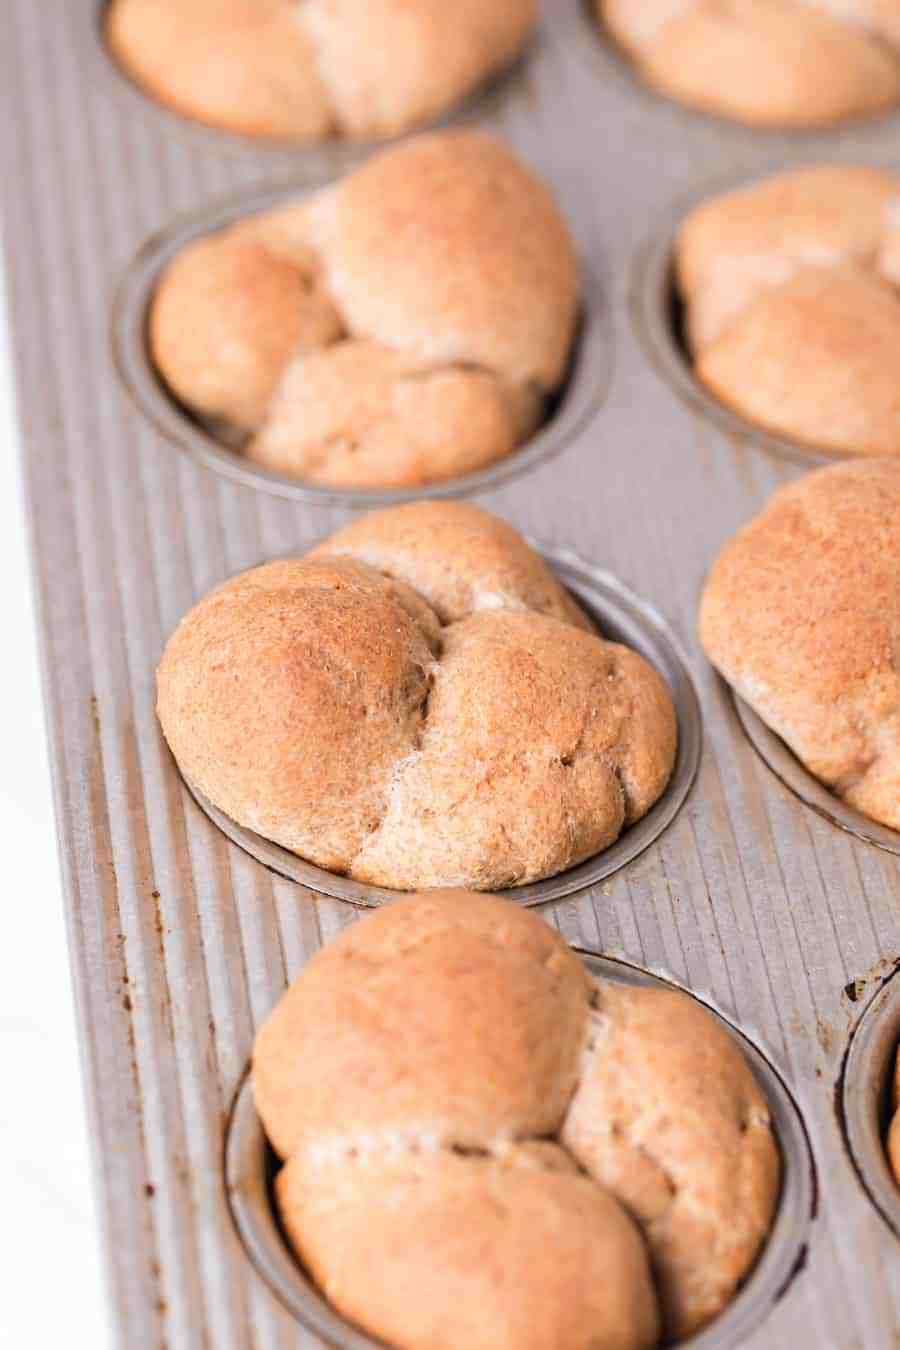 fresh baked whole wheat clover rolls in a muffin tin - close up.